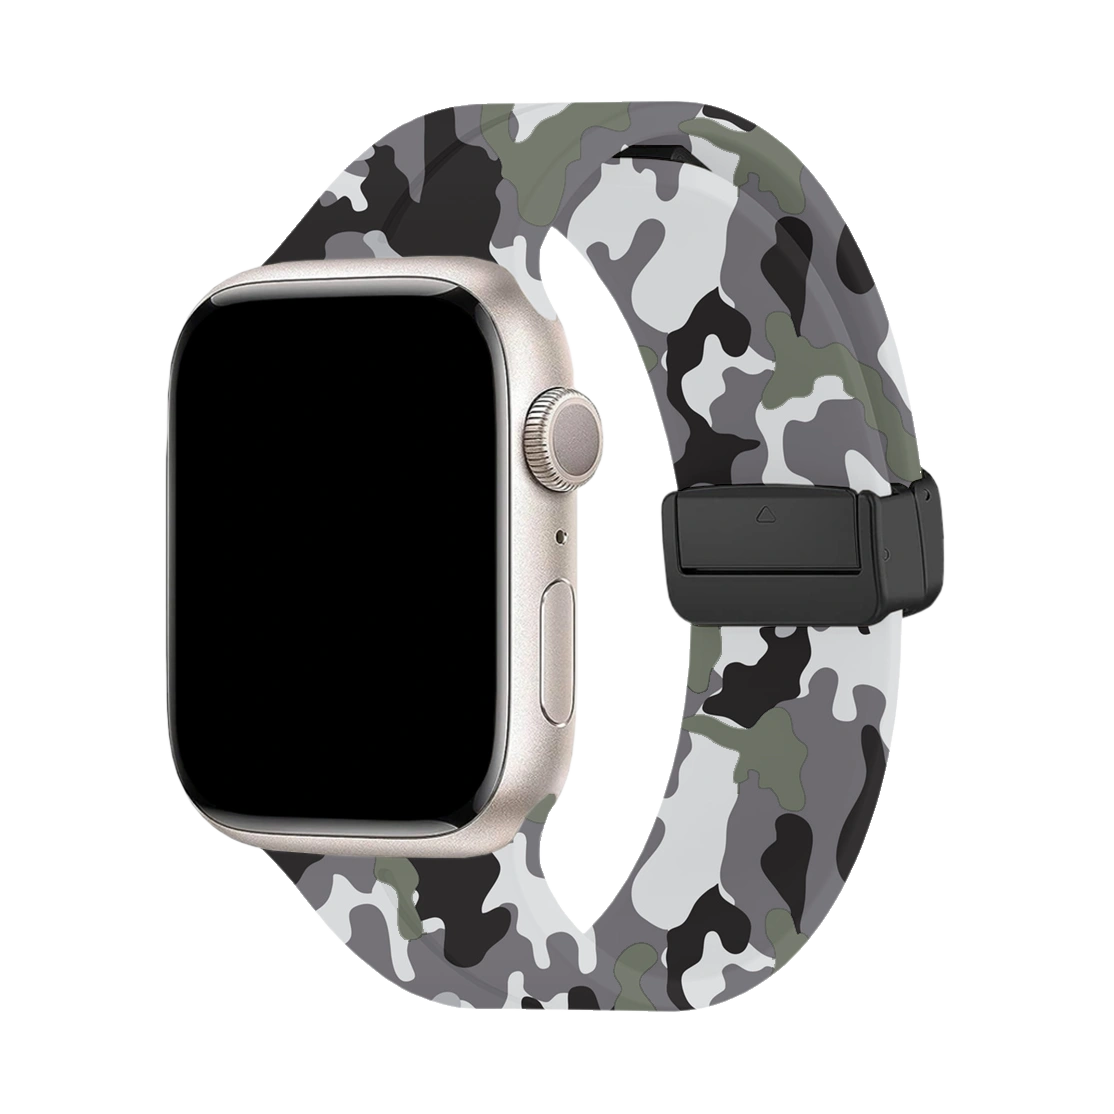 Unipha Apple Watch Silicone Band Magnetic D-Buckle Strap Army Stylish Creative